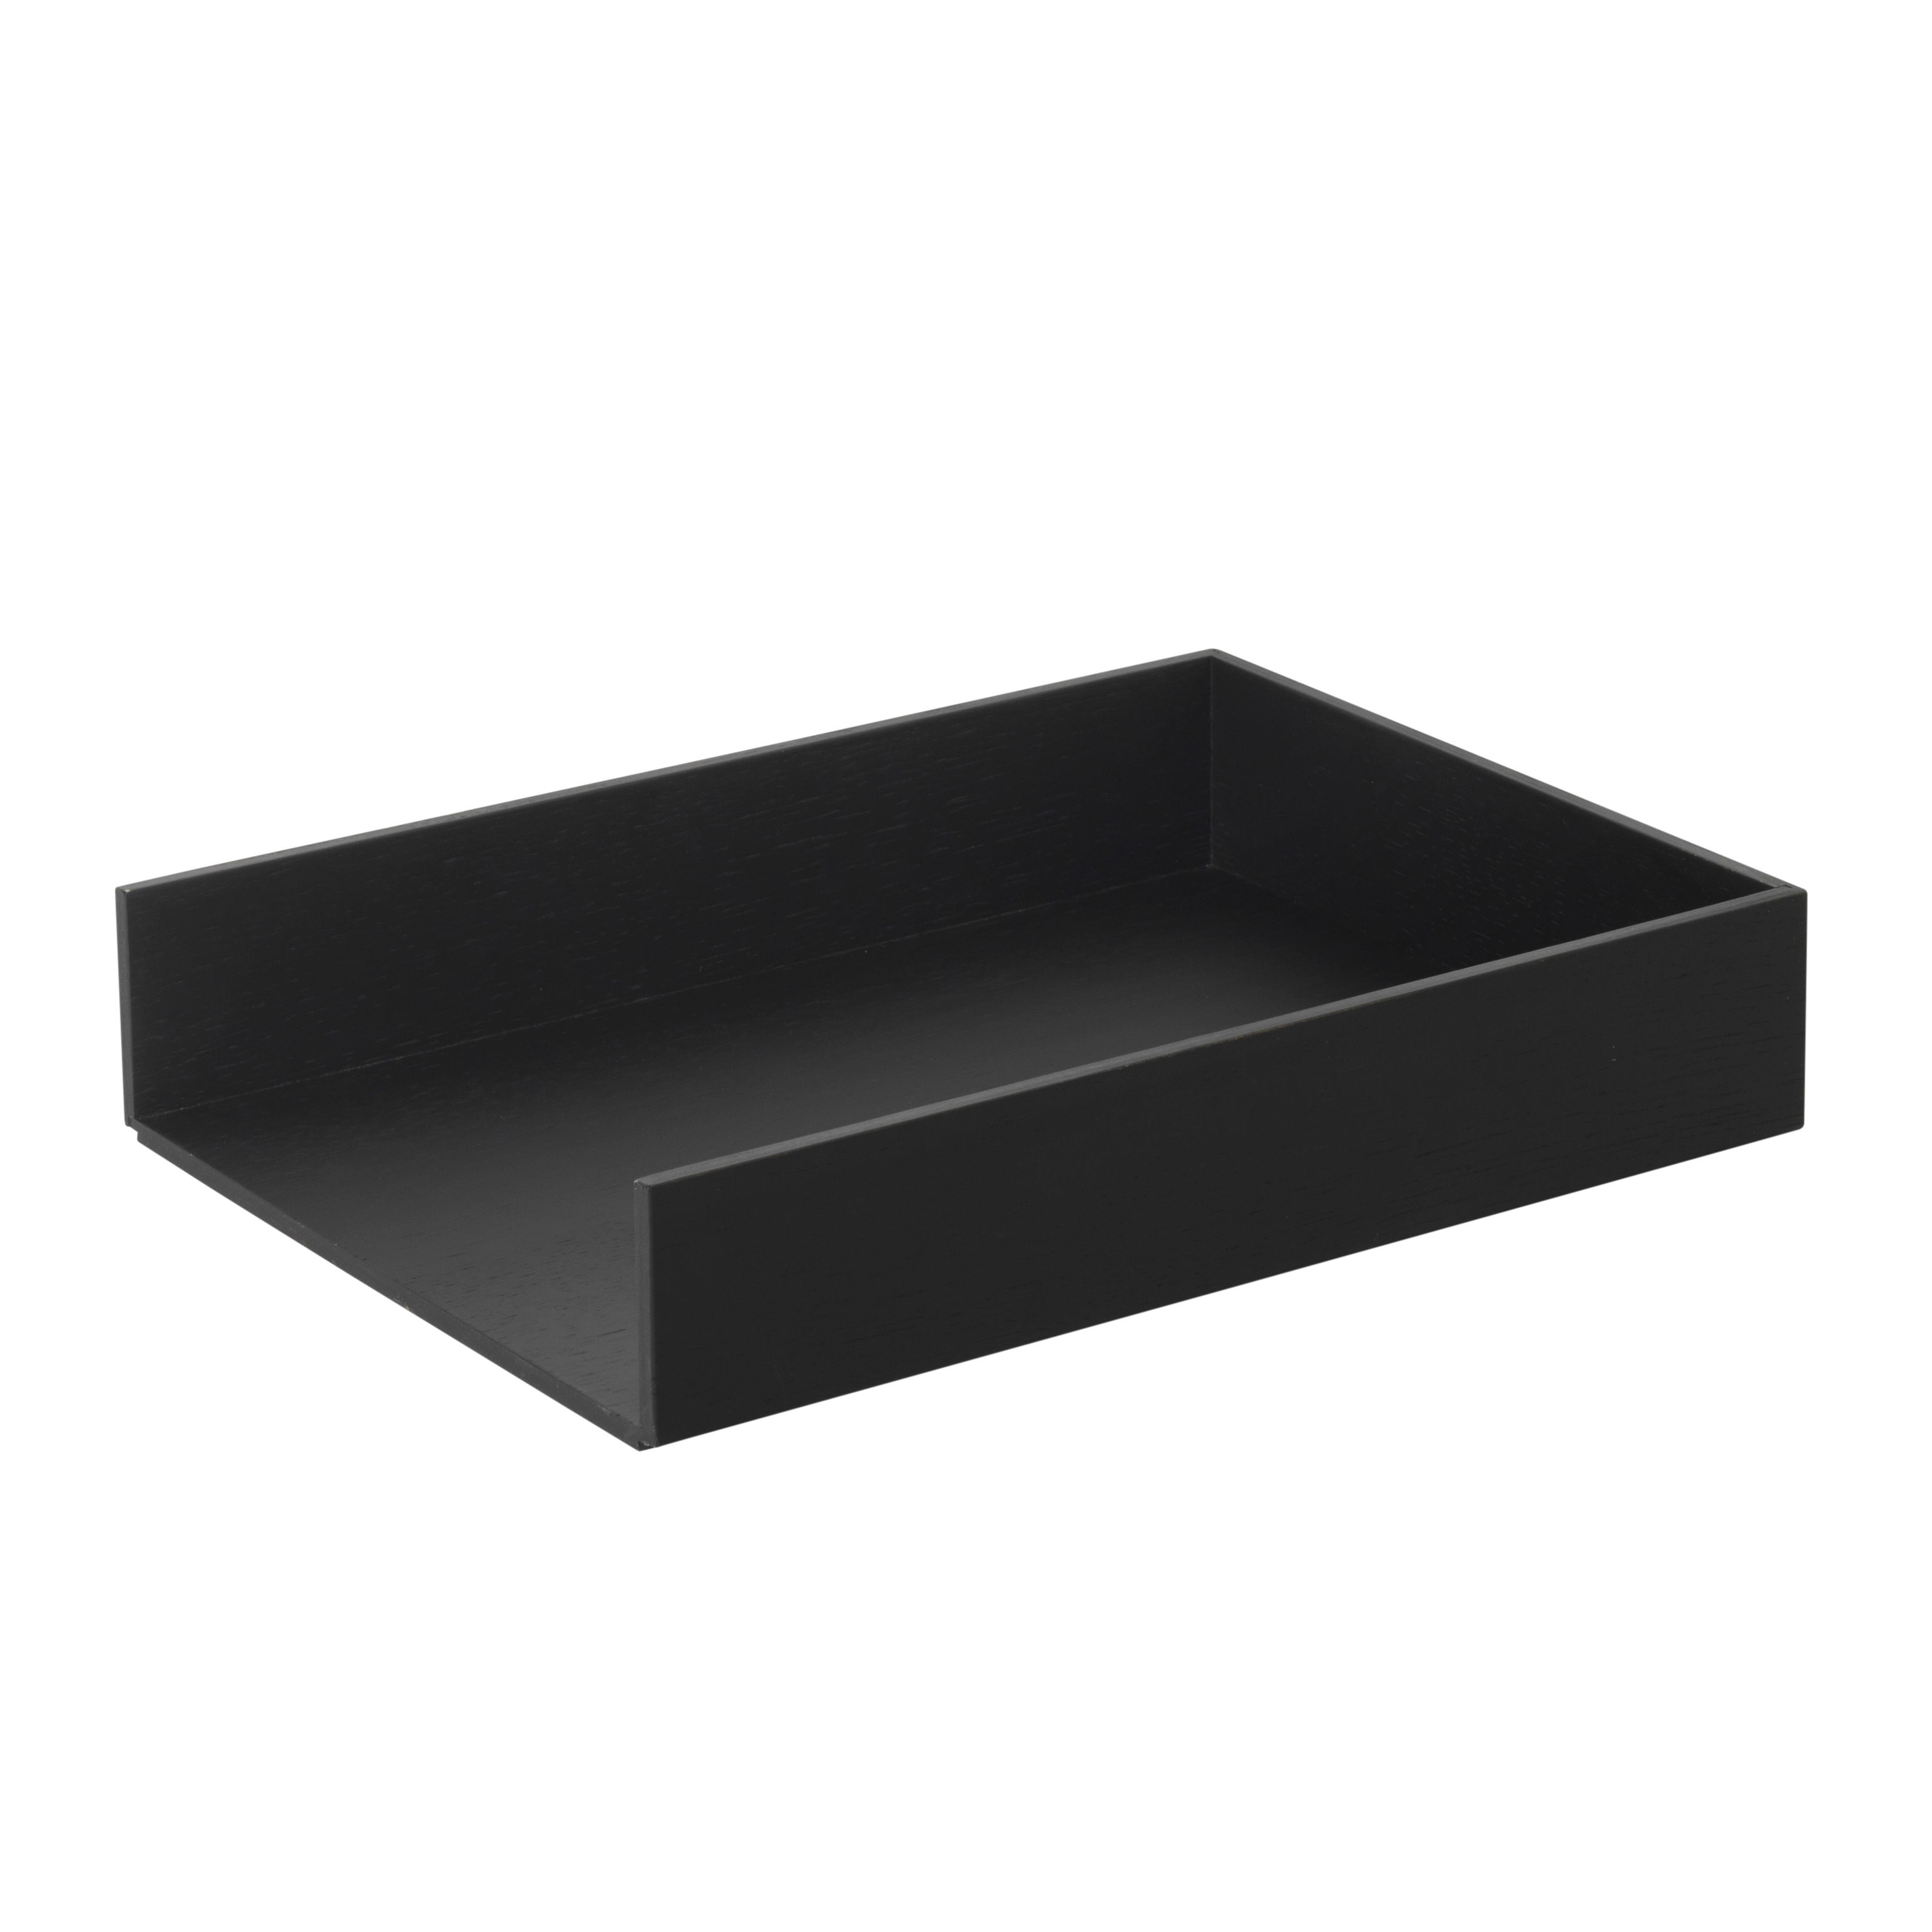 Ferm Living Letter Tray Black Made, Wooden Letter Trays Stackable